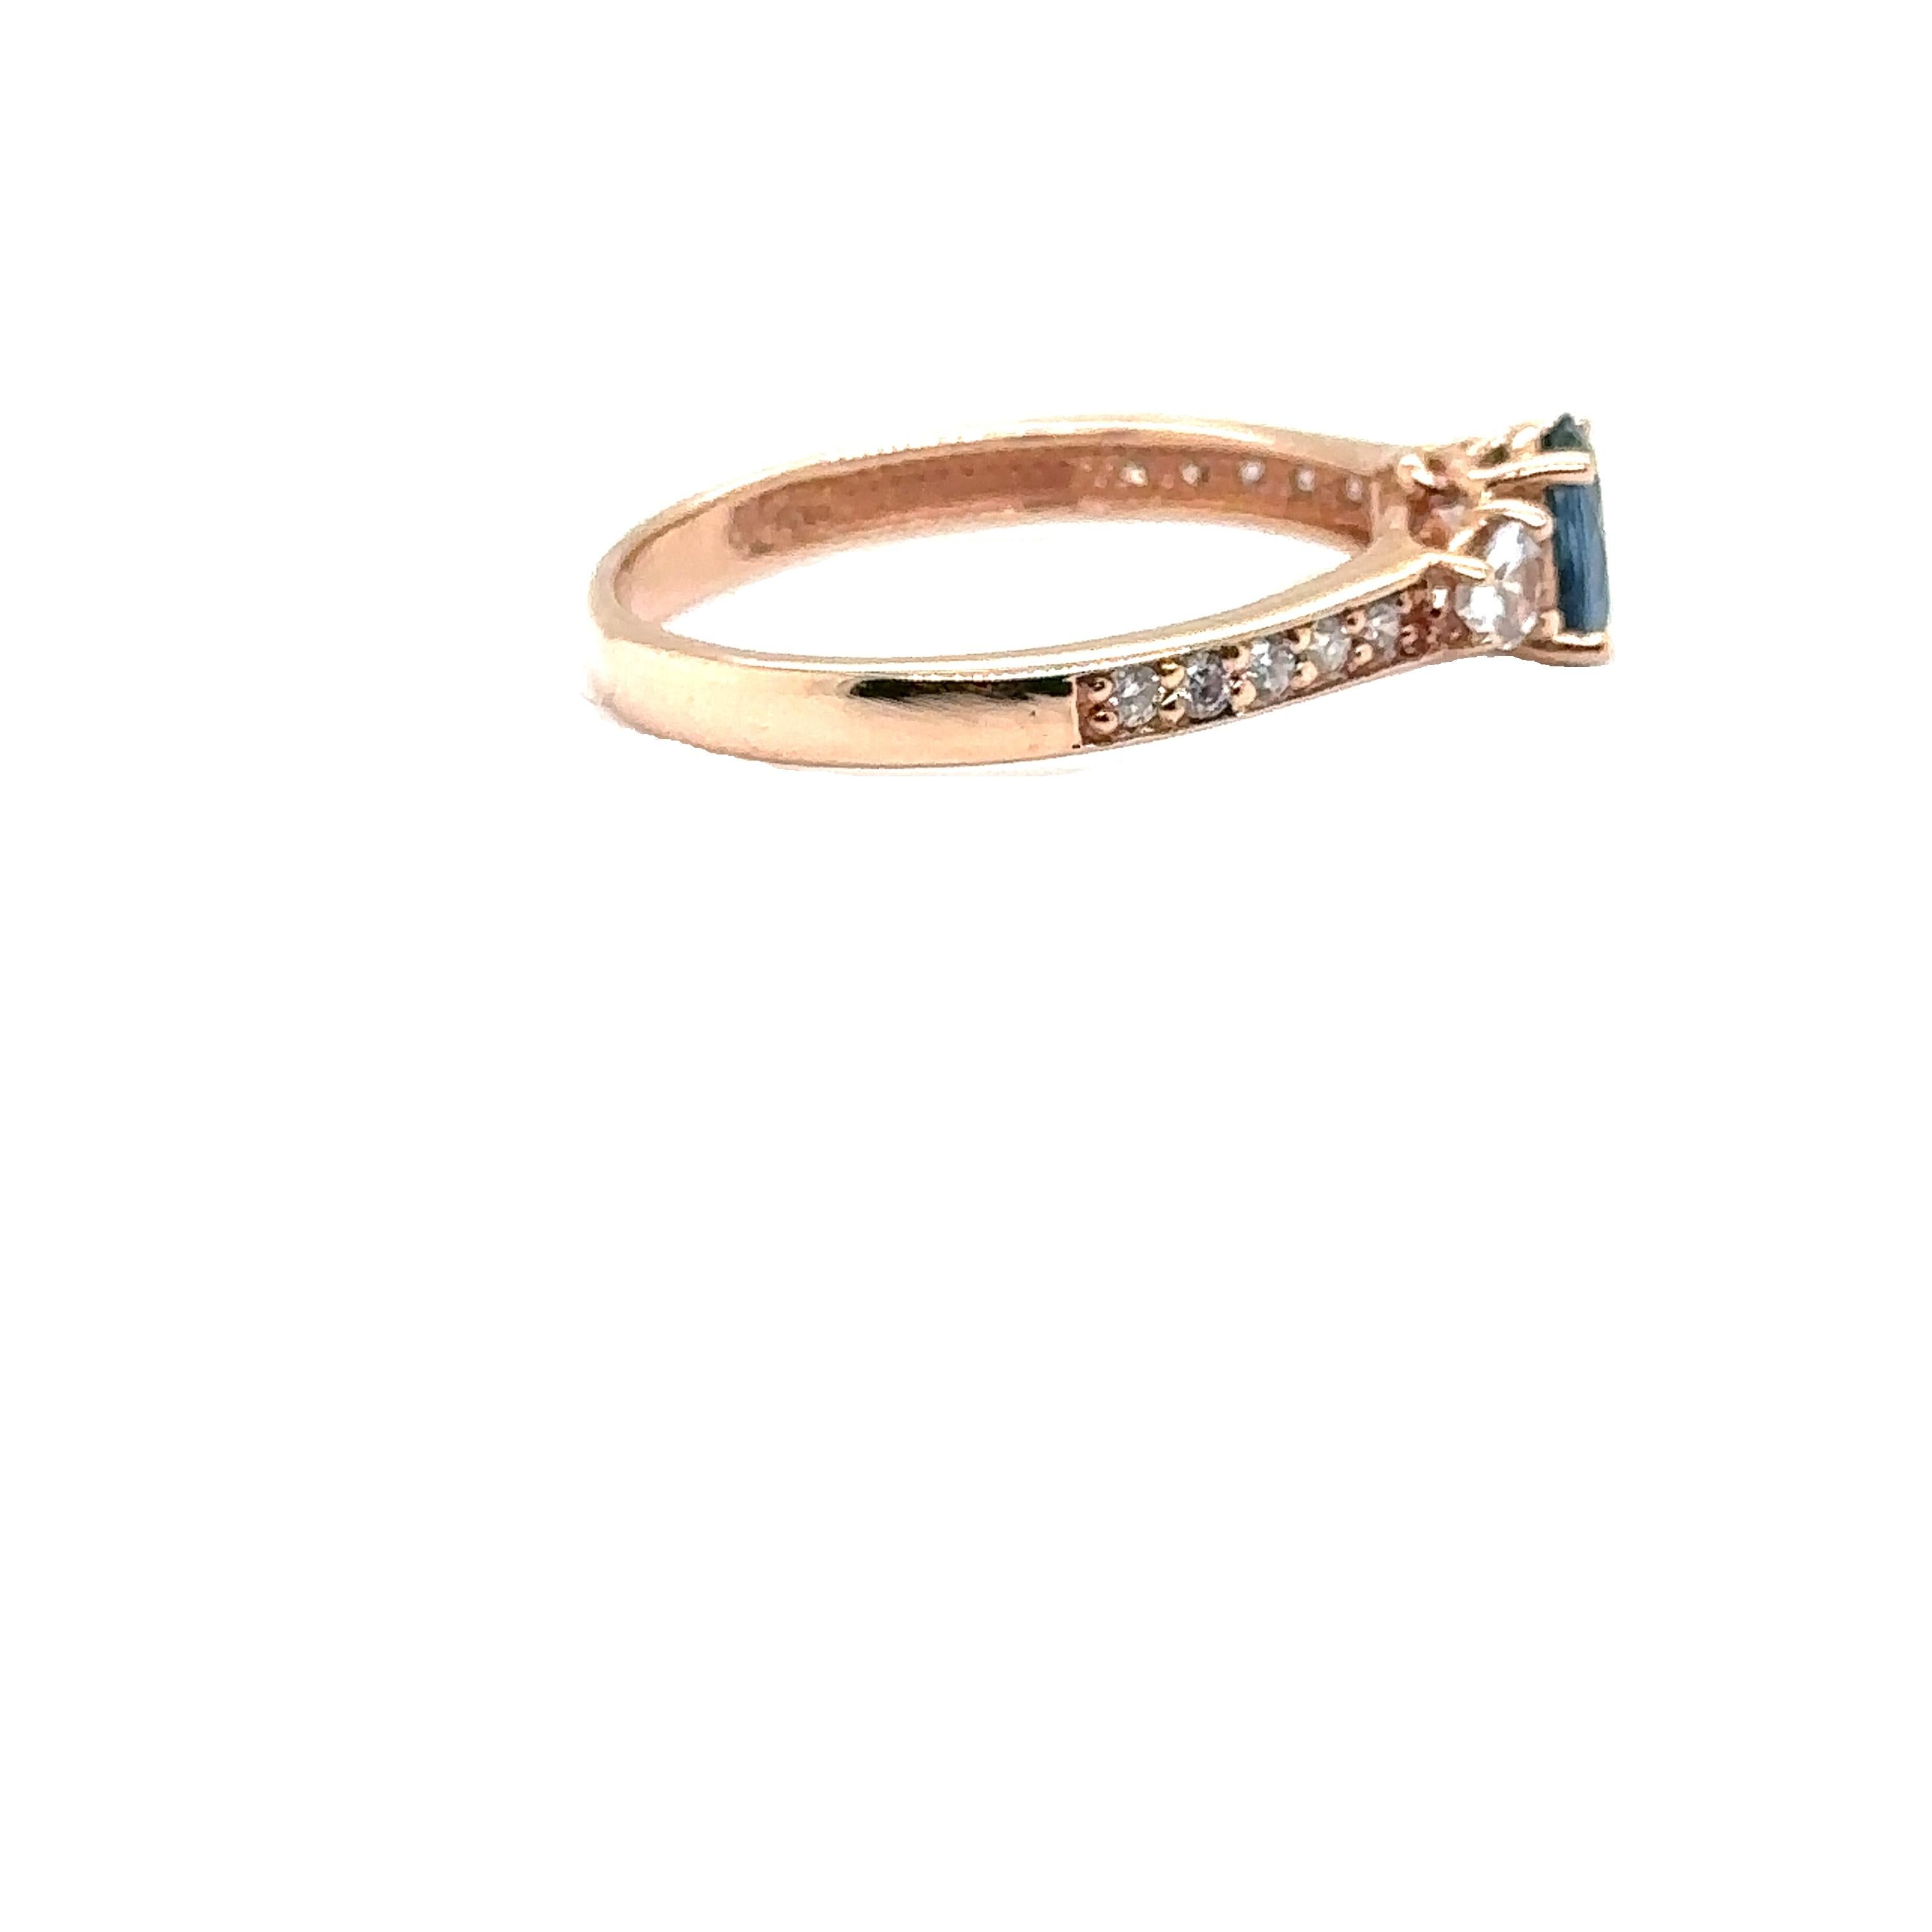 JAS-21-2240 - 14K ROSE GOLD OVAL SAPPHIRE RING with WHITE SAPPHIRES & DIAMONDS For Sale 1